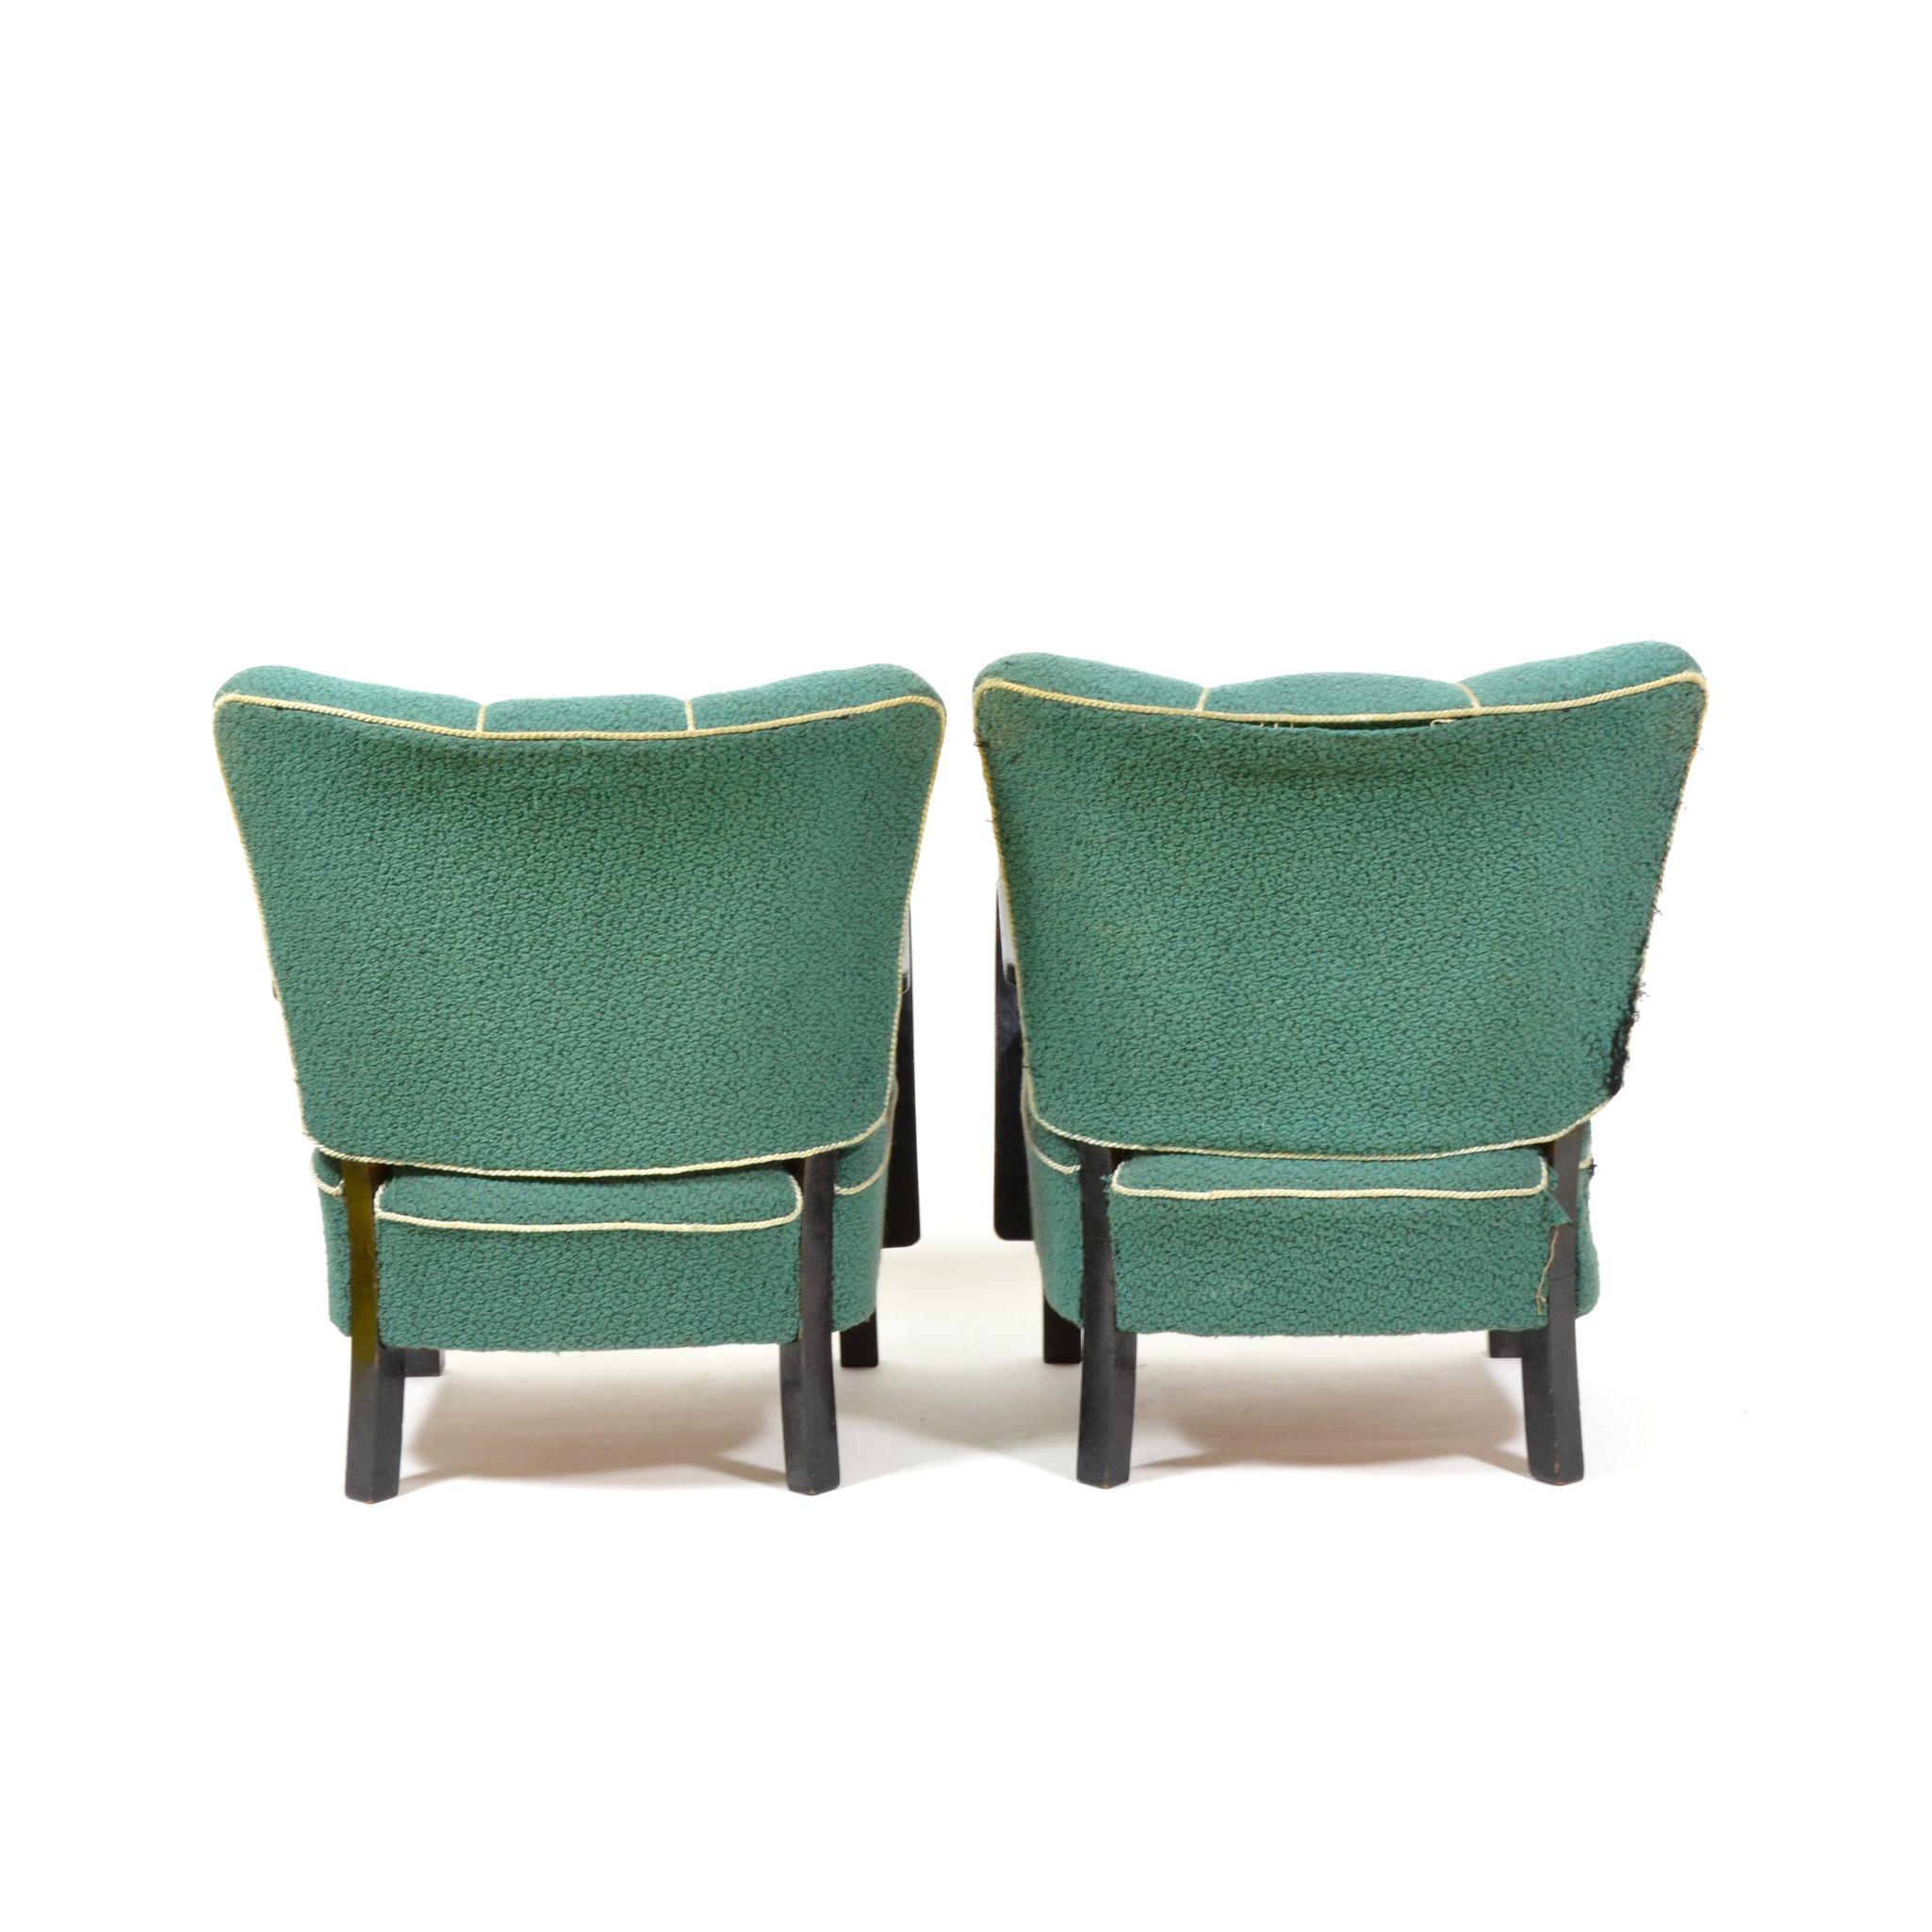 Pair of original armchairs with markedly shaped backrest in art deco style. Armchairs are in original condition, need to be refurbished. Spring seats with original padding. Manufactured in former Czechoslovakia during 1940s.